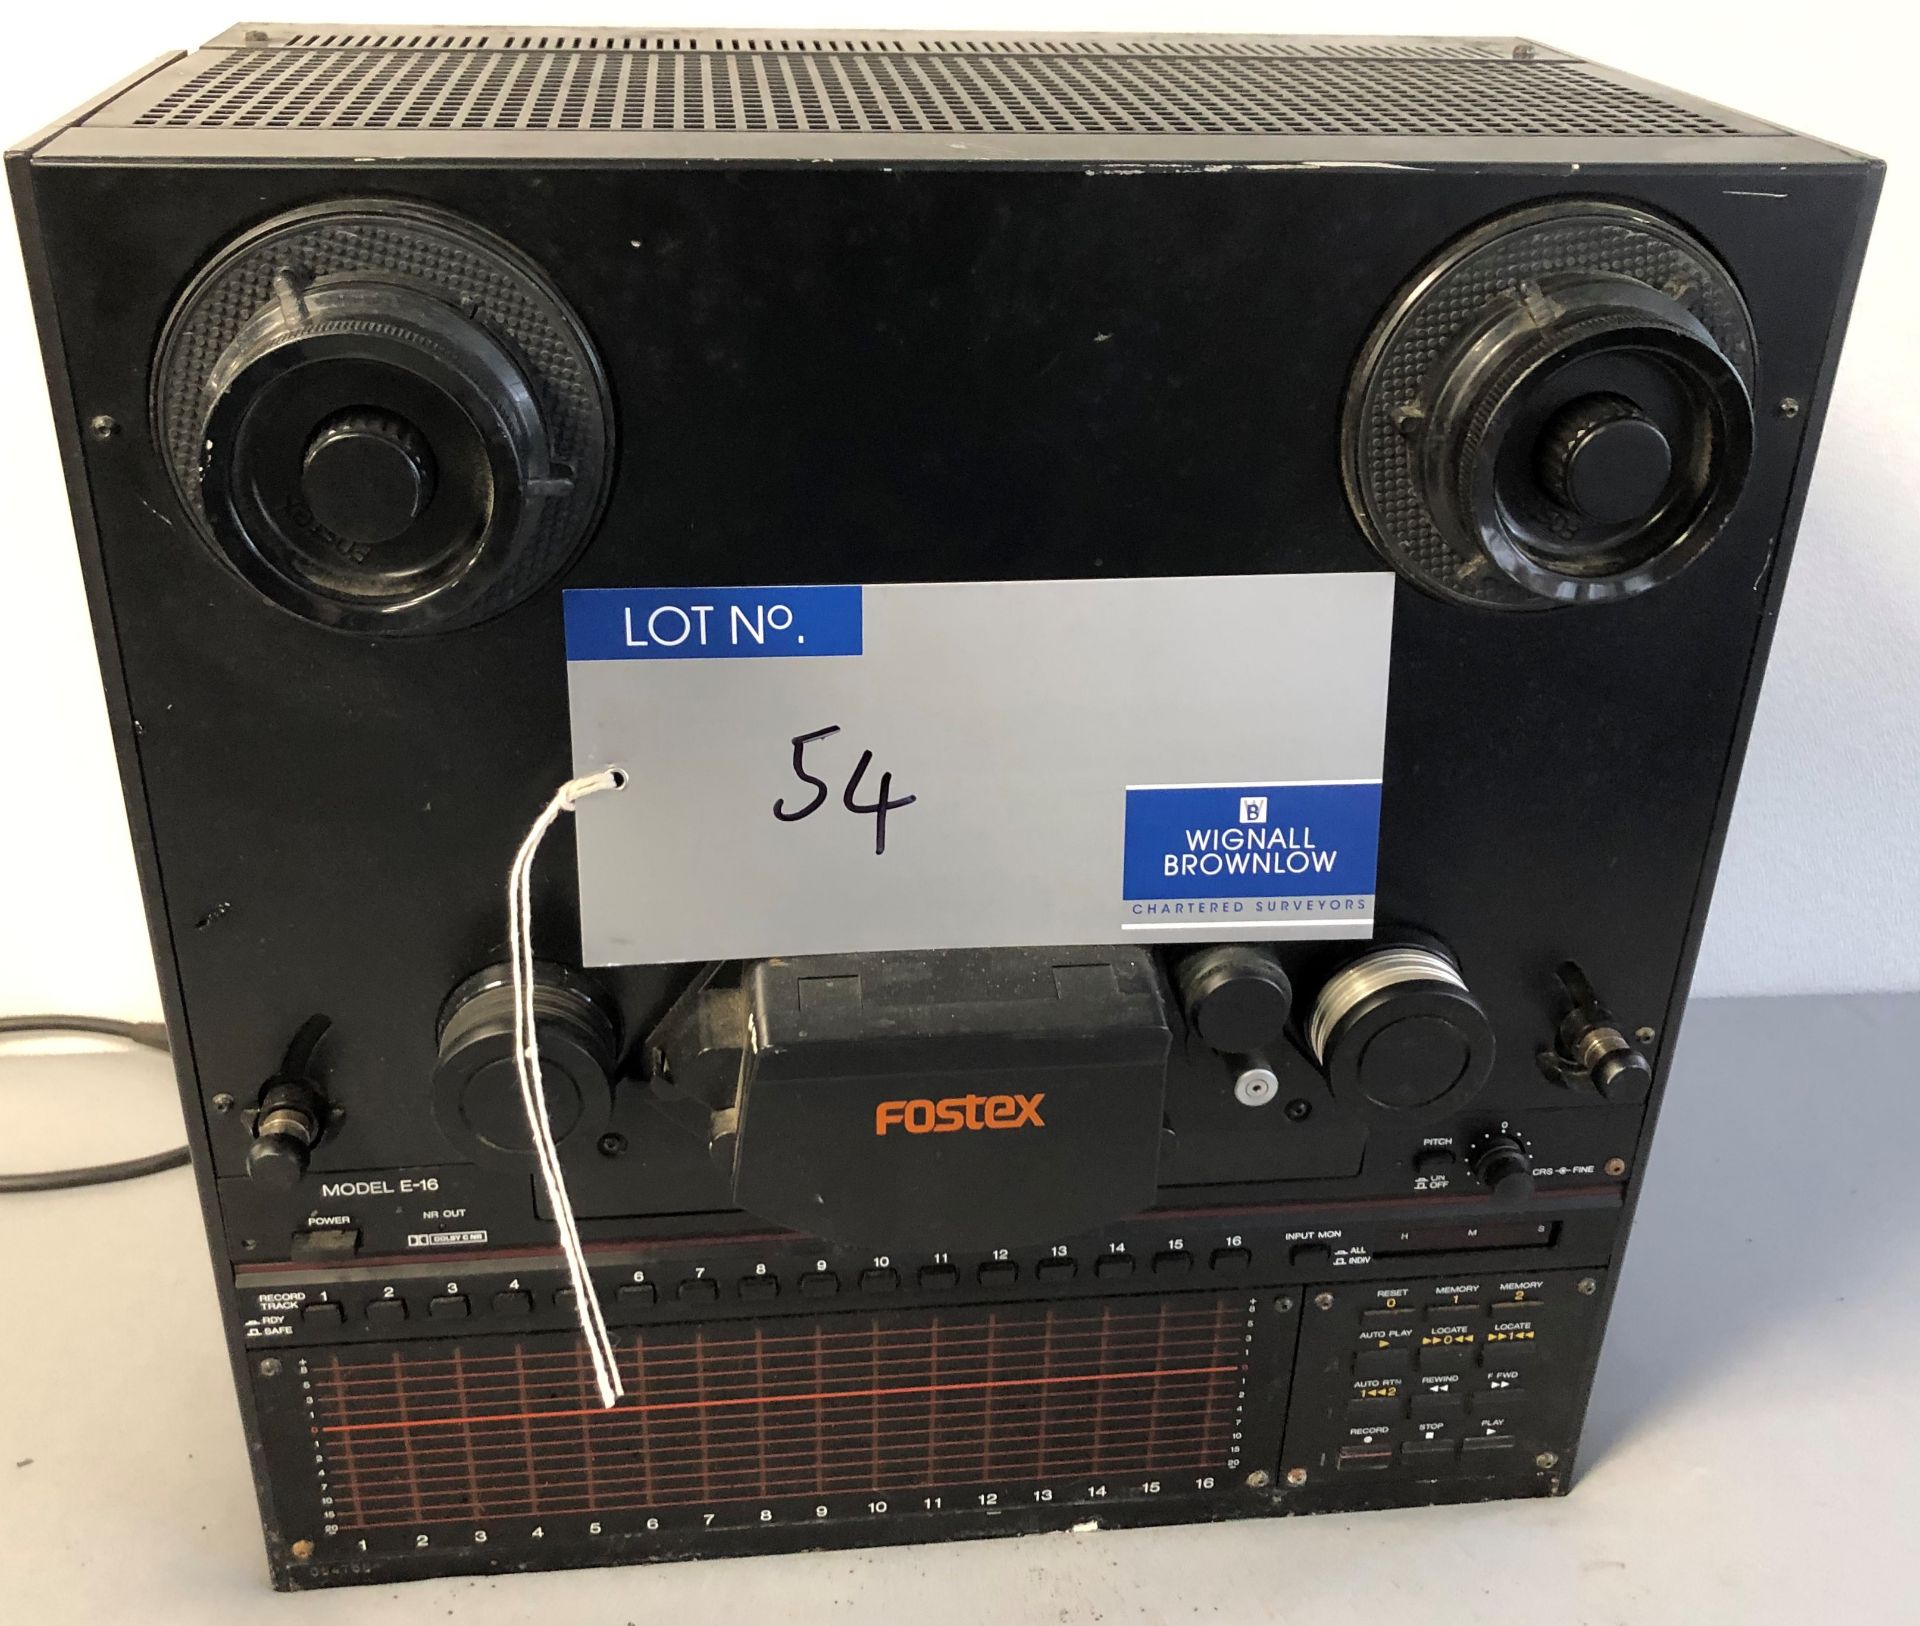 A Fostex E-16 Reel to Reel Multitrack Recorder (powers up).